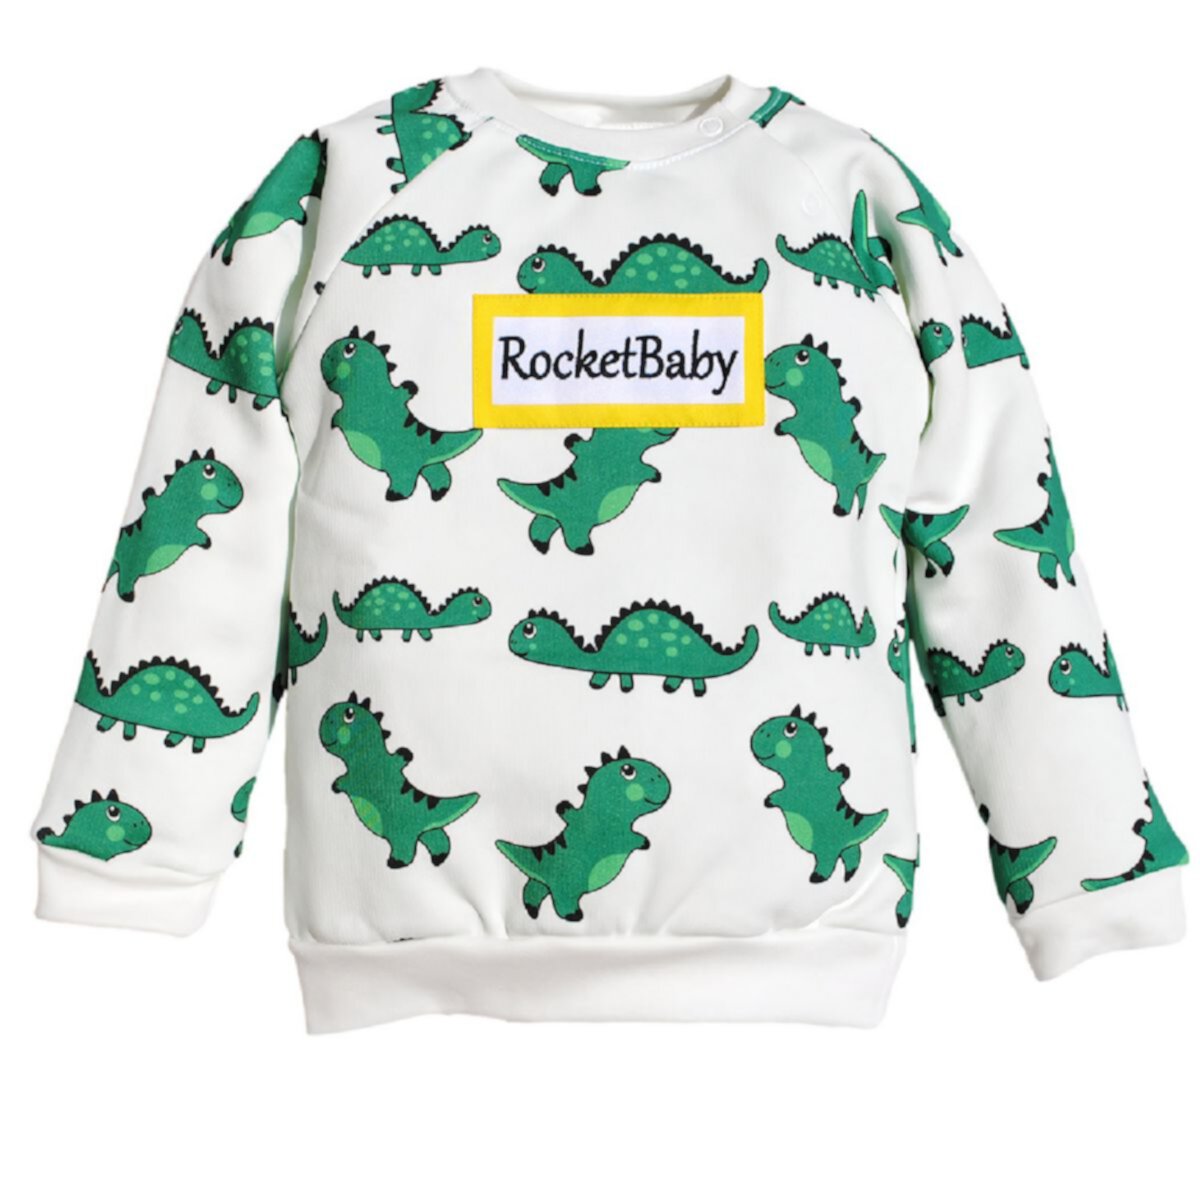 Cotton Dinosaur Themed Sweatshirt with Snap Buttons RocketBaby